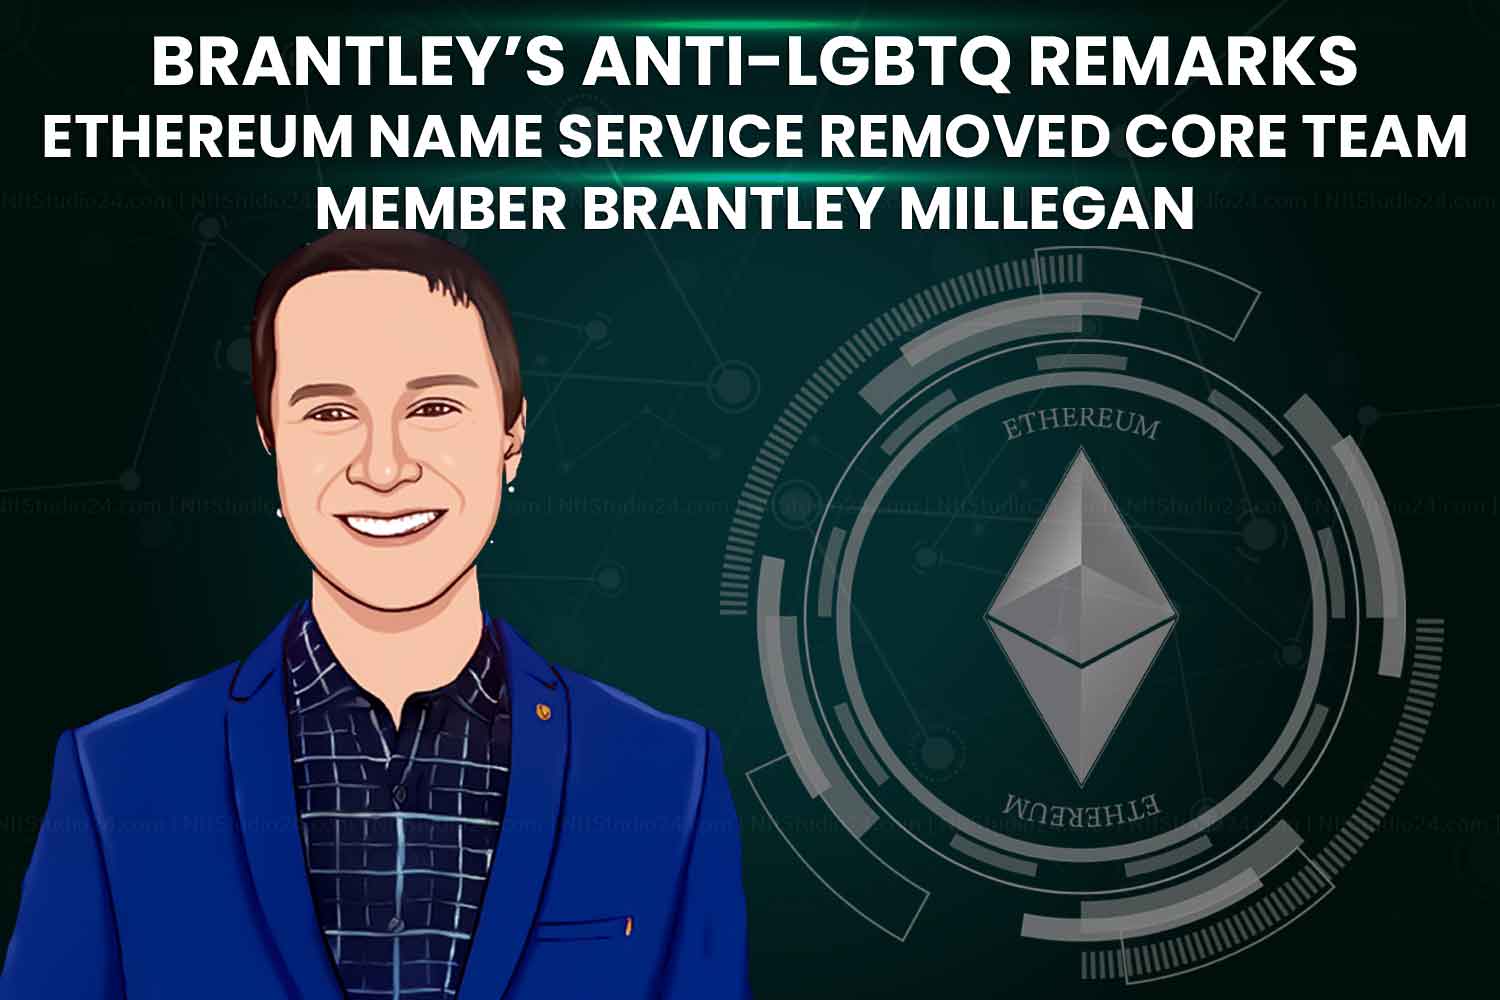 Core Team Member Brantley Millegan Removed From Ethereum Name Service